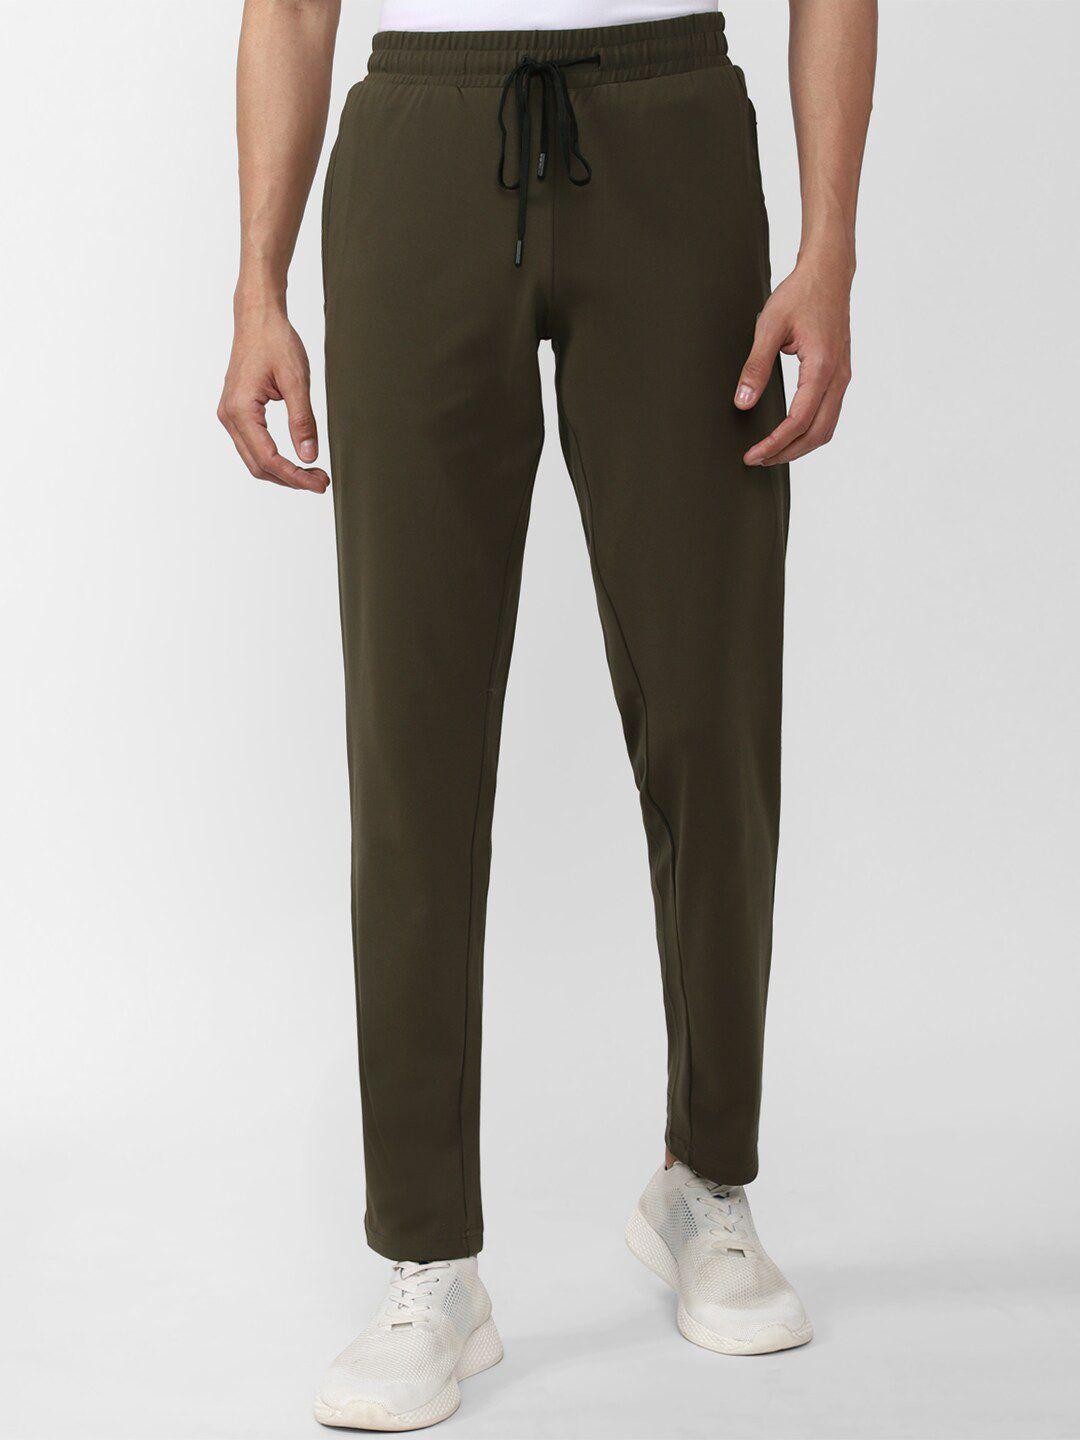 peter england casuals men olive green track pant